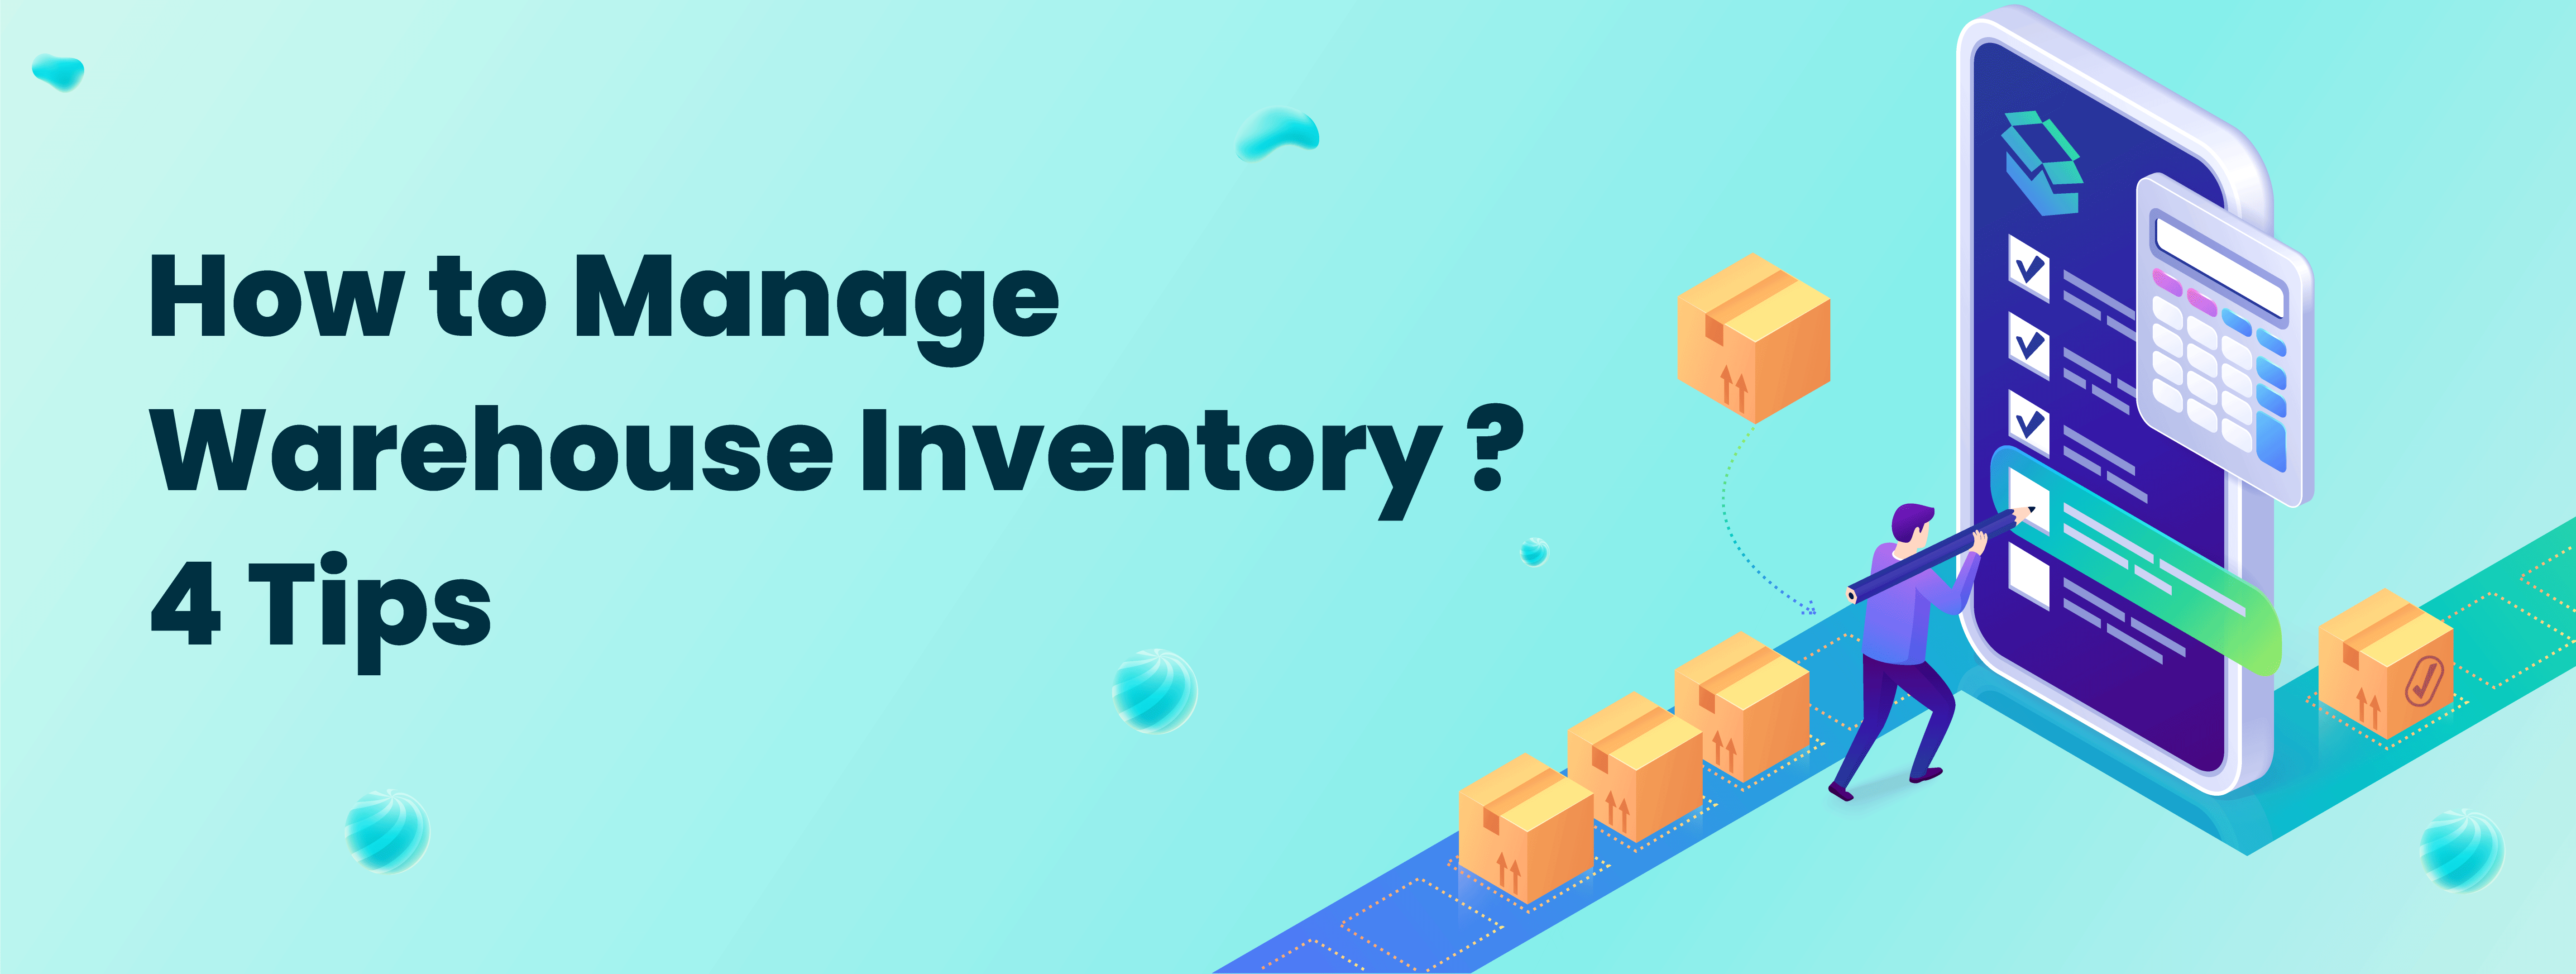  How to Manage Warehouse Inventory? 4 Tips